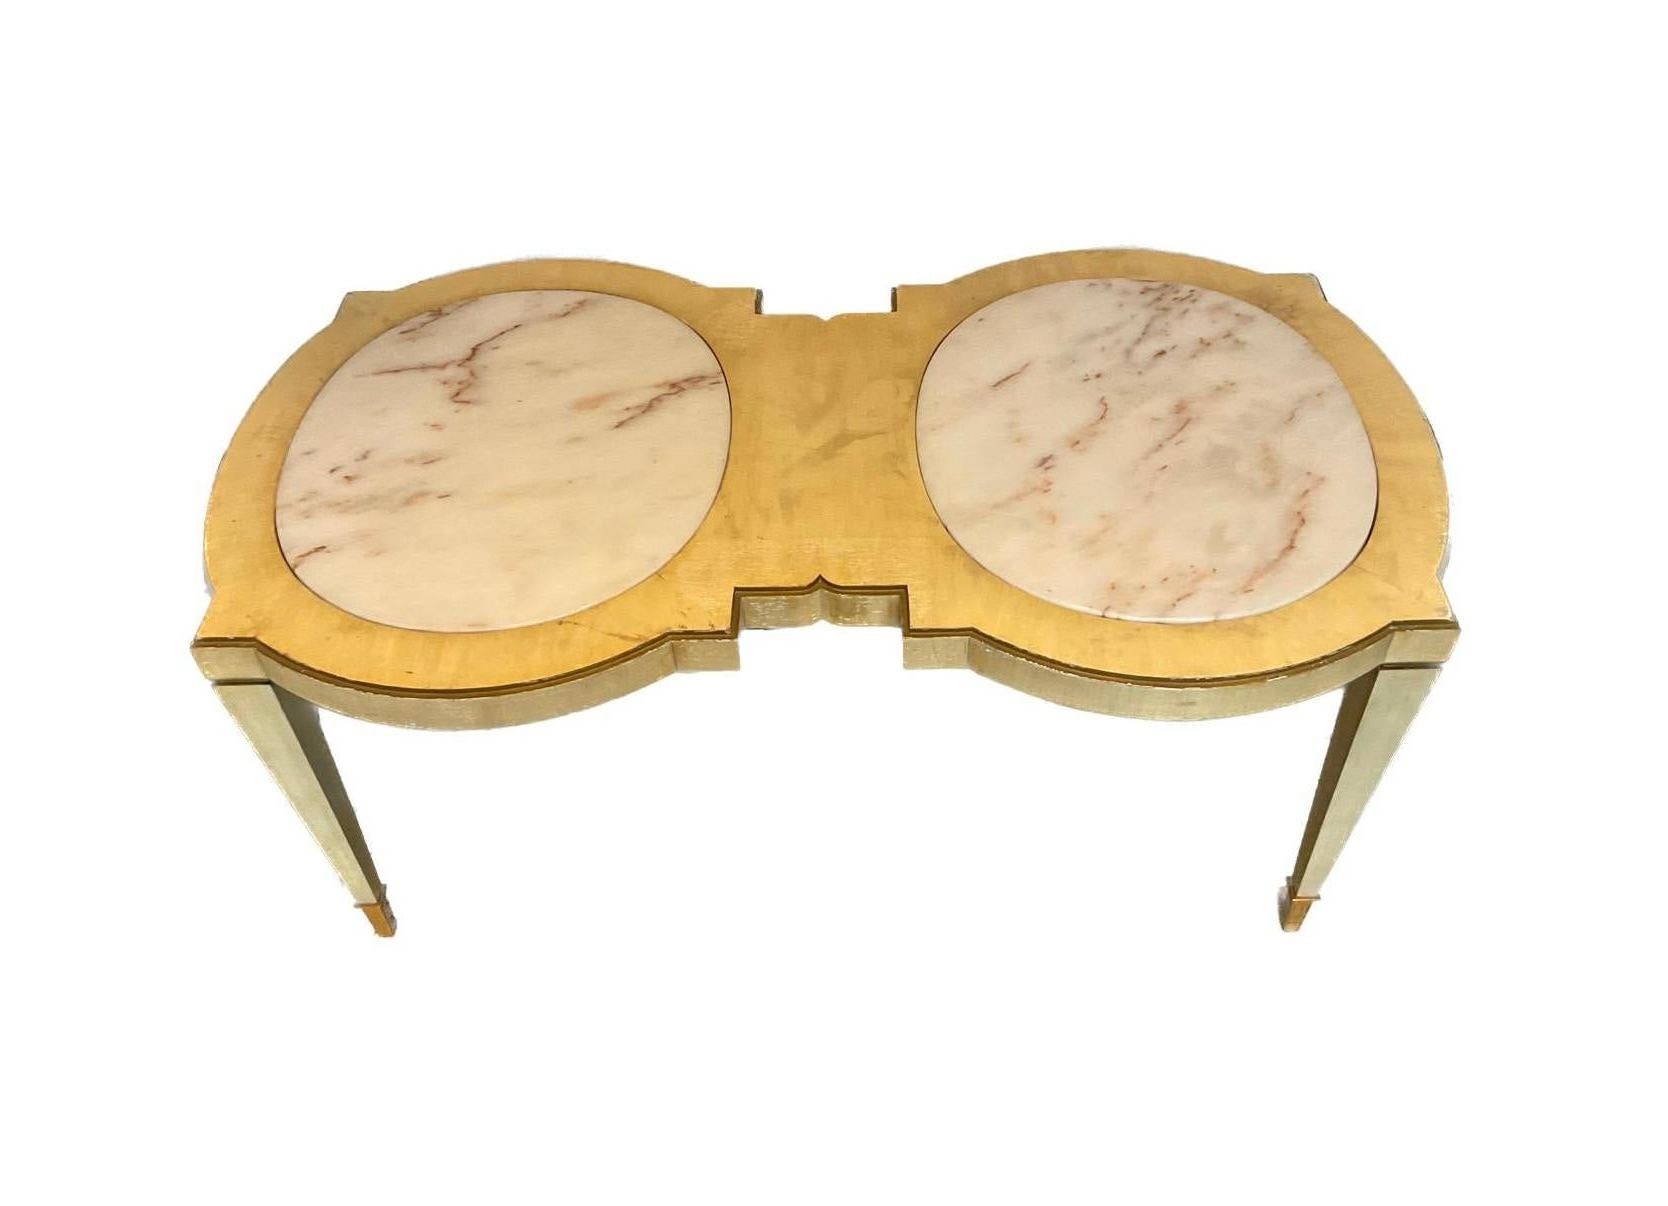 1950s Whimsical Marble Insert  / Wood Coffee Table In Good Condition For Sale In Tarrytown, NY